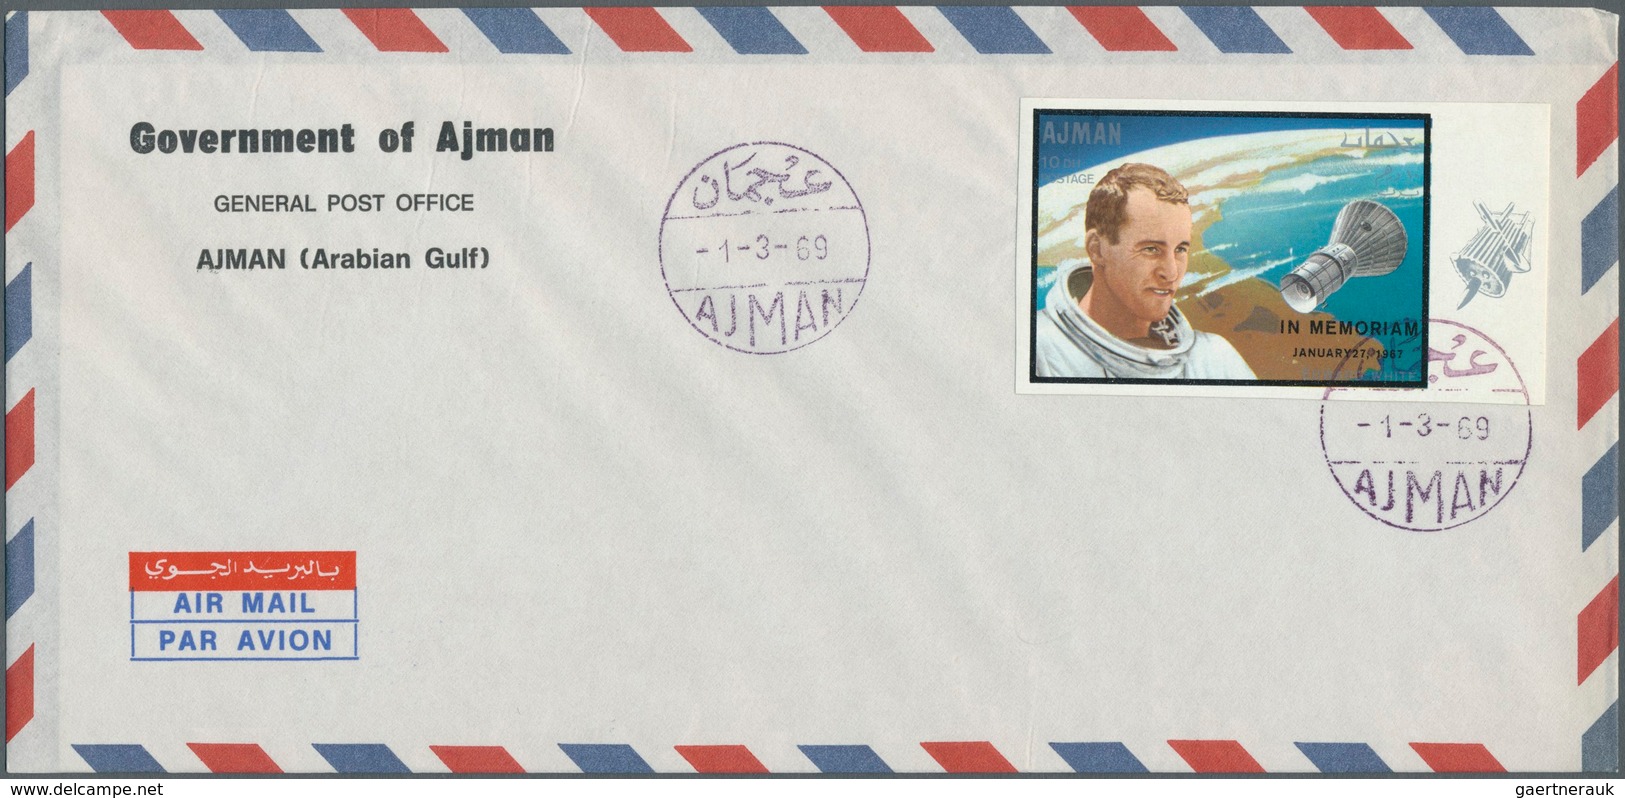 08015 Adschman / Ajman: 1969, SPACE (Apollo 9+10, Gagarin, White), four values with overprint perf./imperf